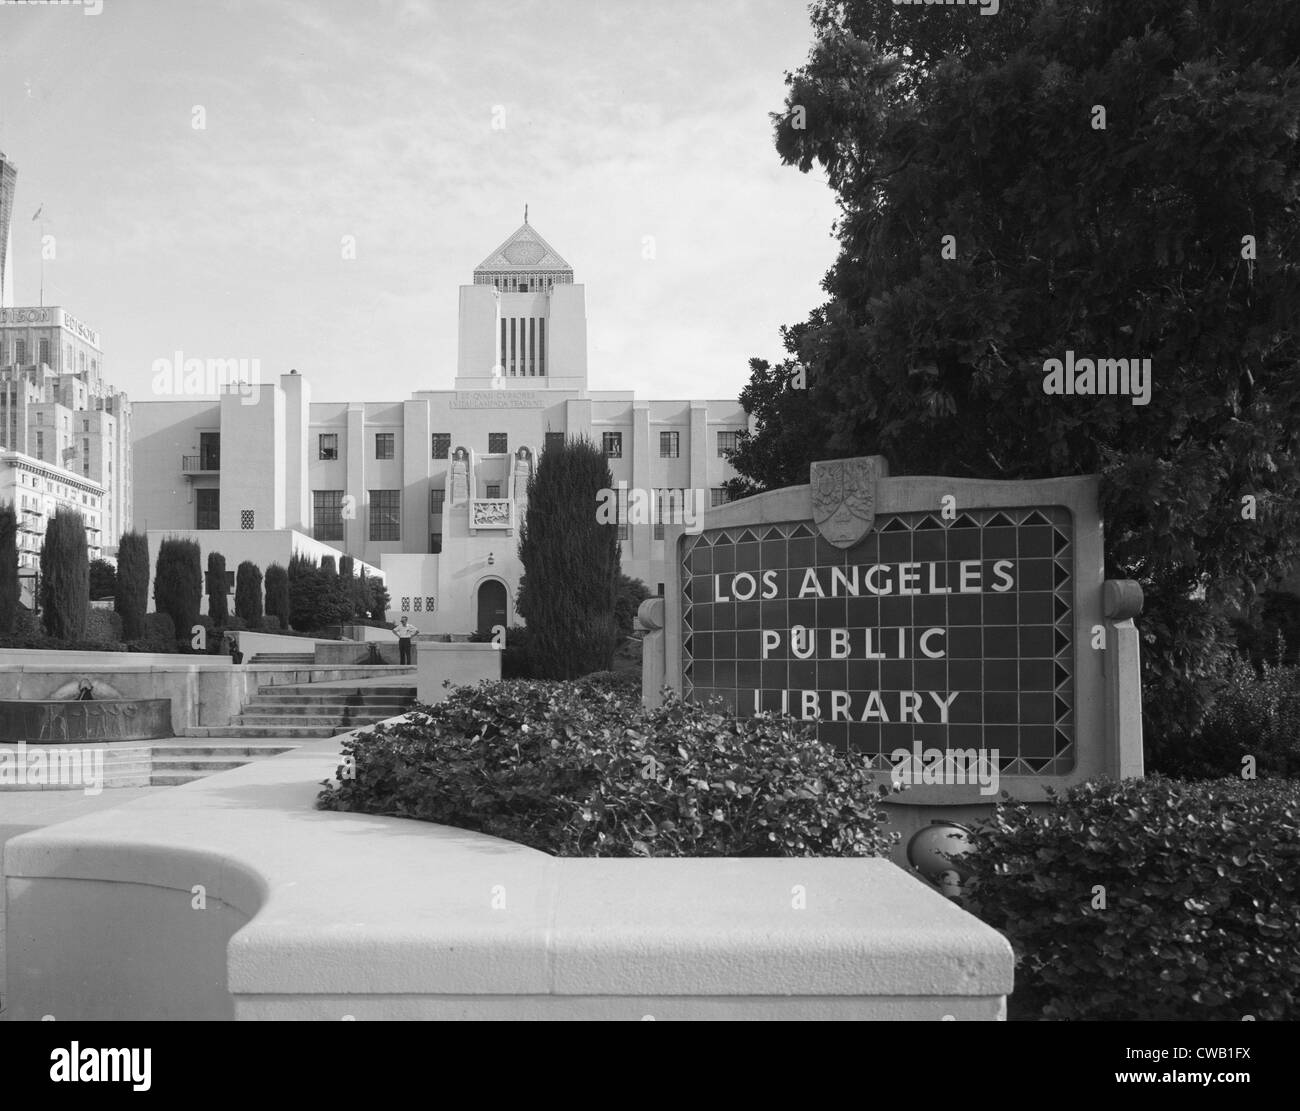 Scenes of Los Angeles, the Los Angeles Public Library, designed by Bertram G. Goodhue in 1924, California, circa 1970s. Stock Photo